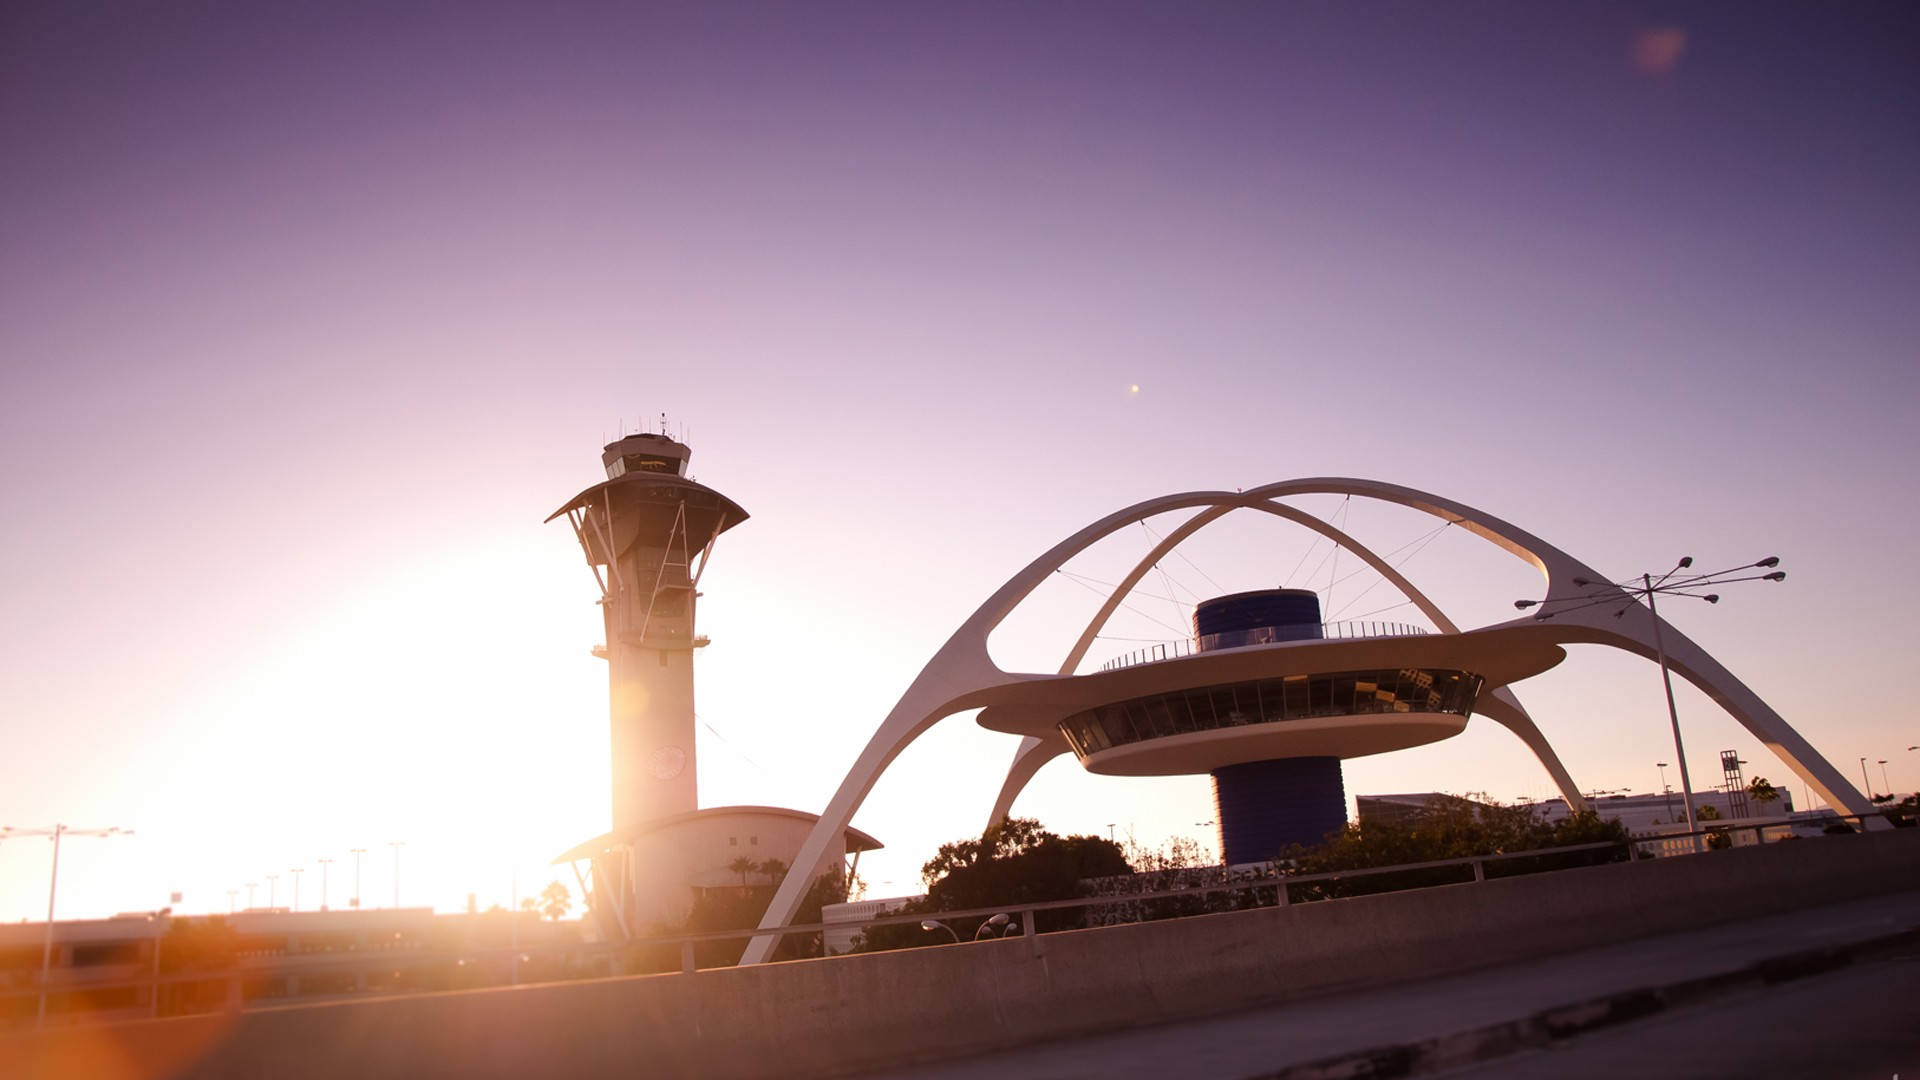 The famous Los Angeles Theme Building at LAX, illuminated by the morning sun Wallpaper